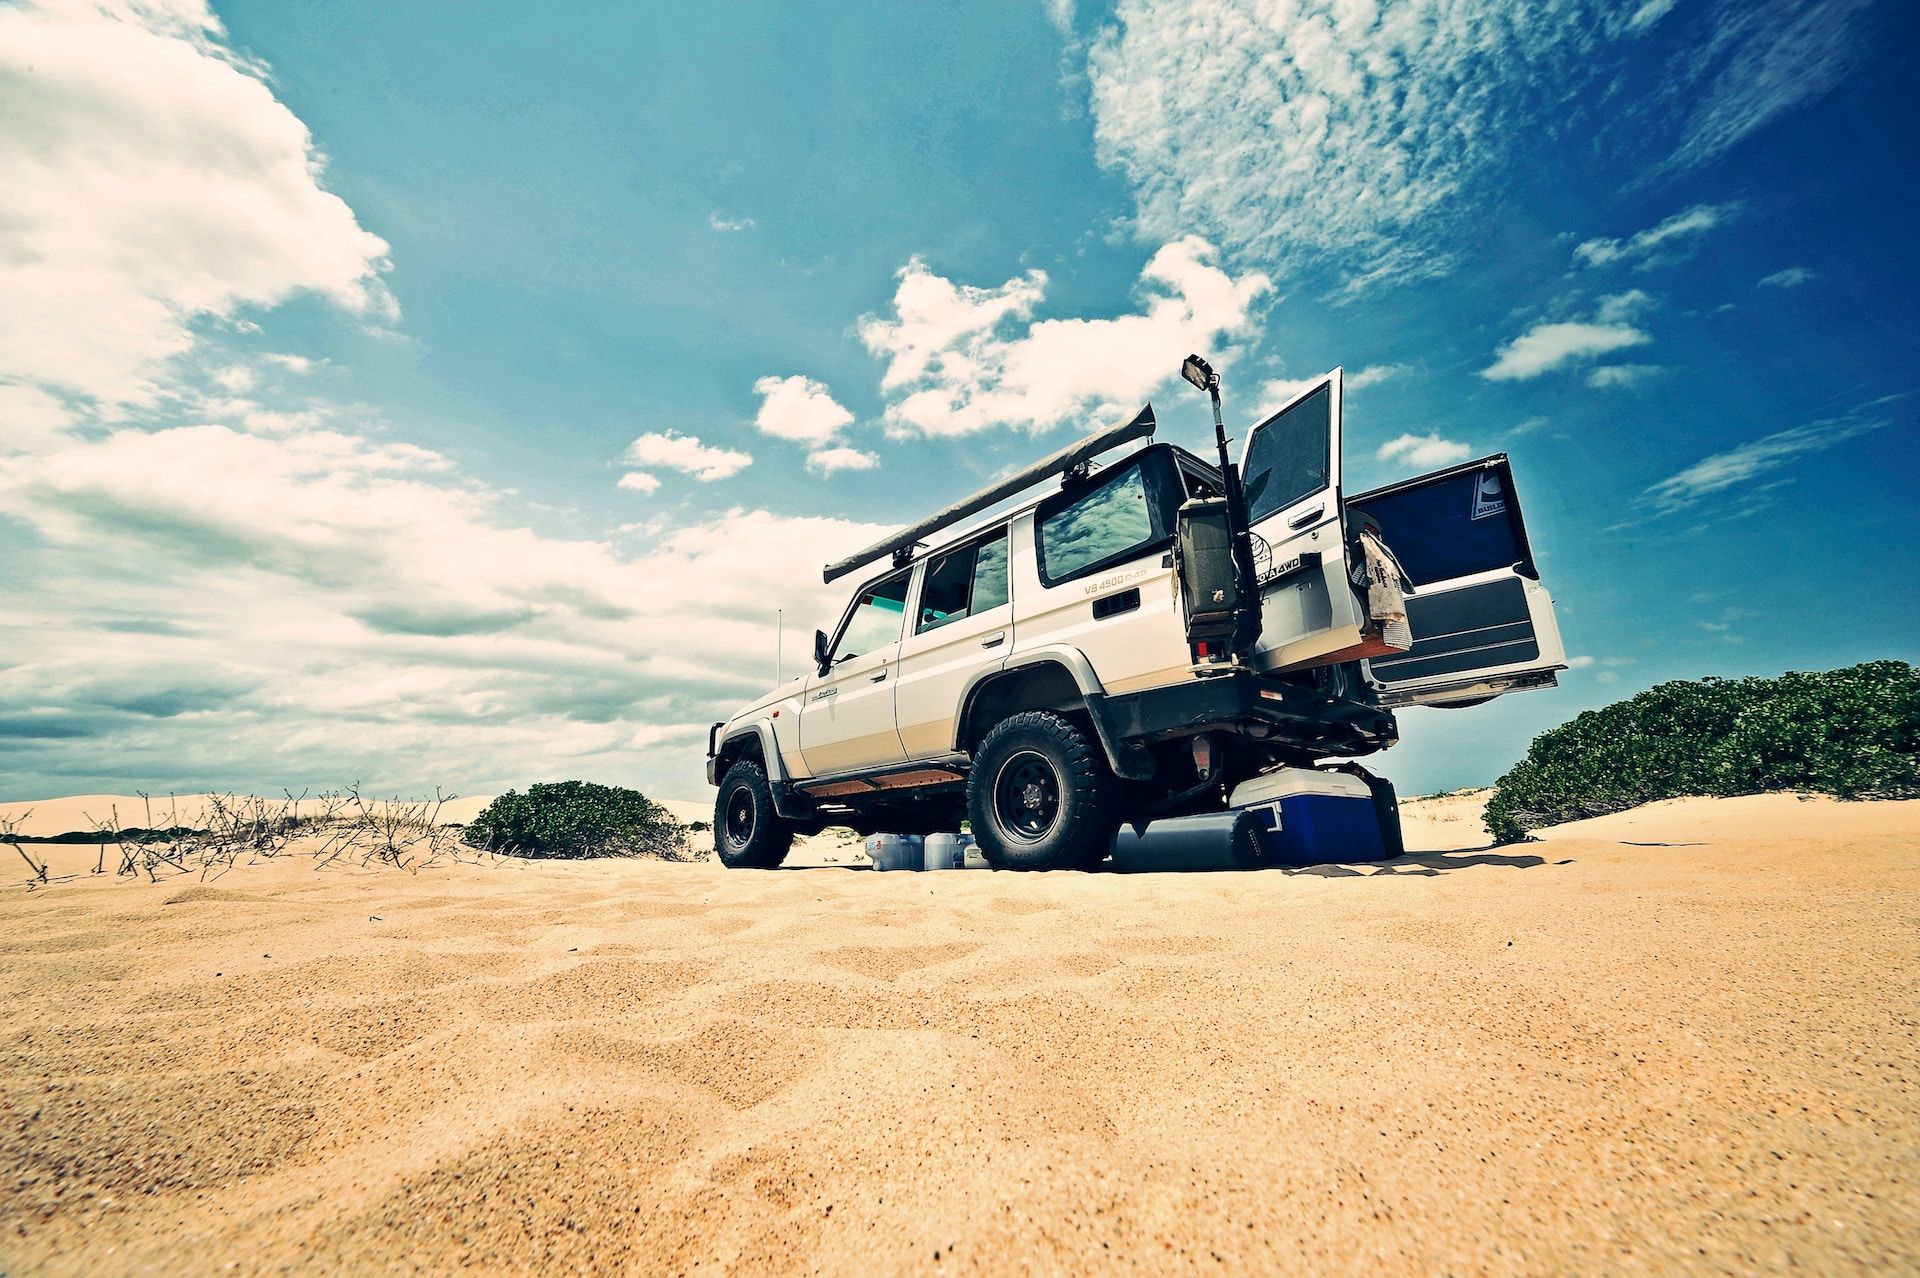 A Land Cruiser getting loaded up with supplies on the beach in Australia